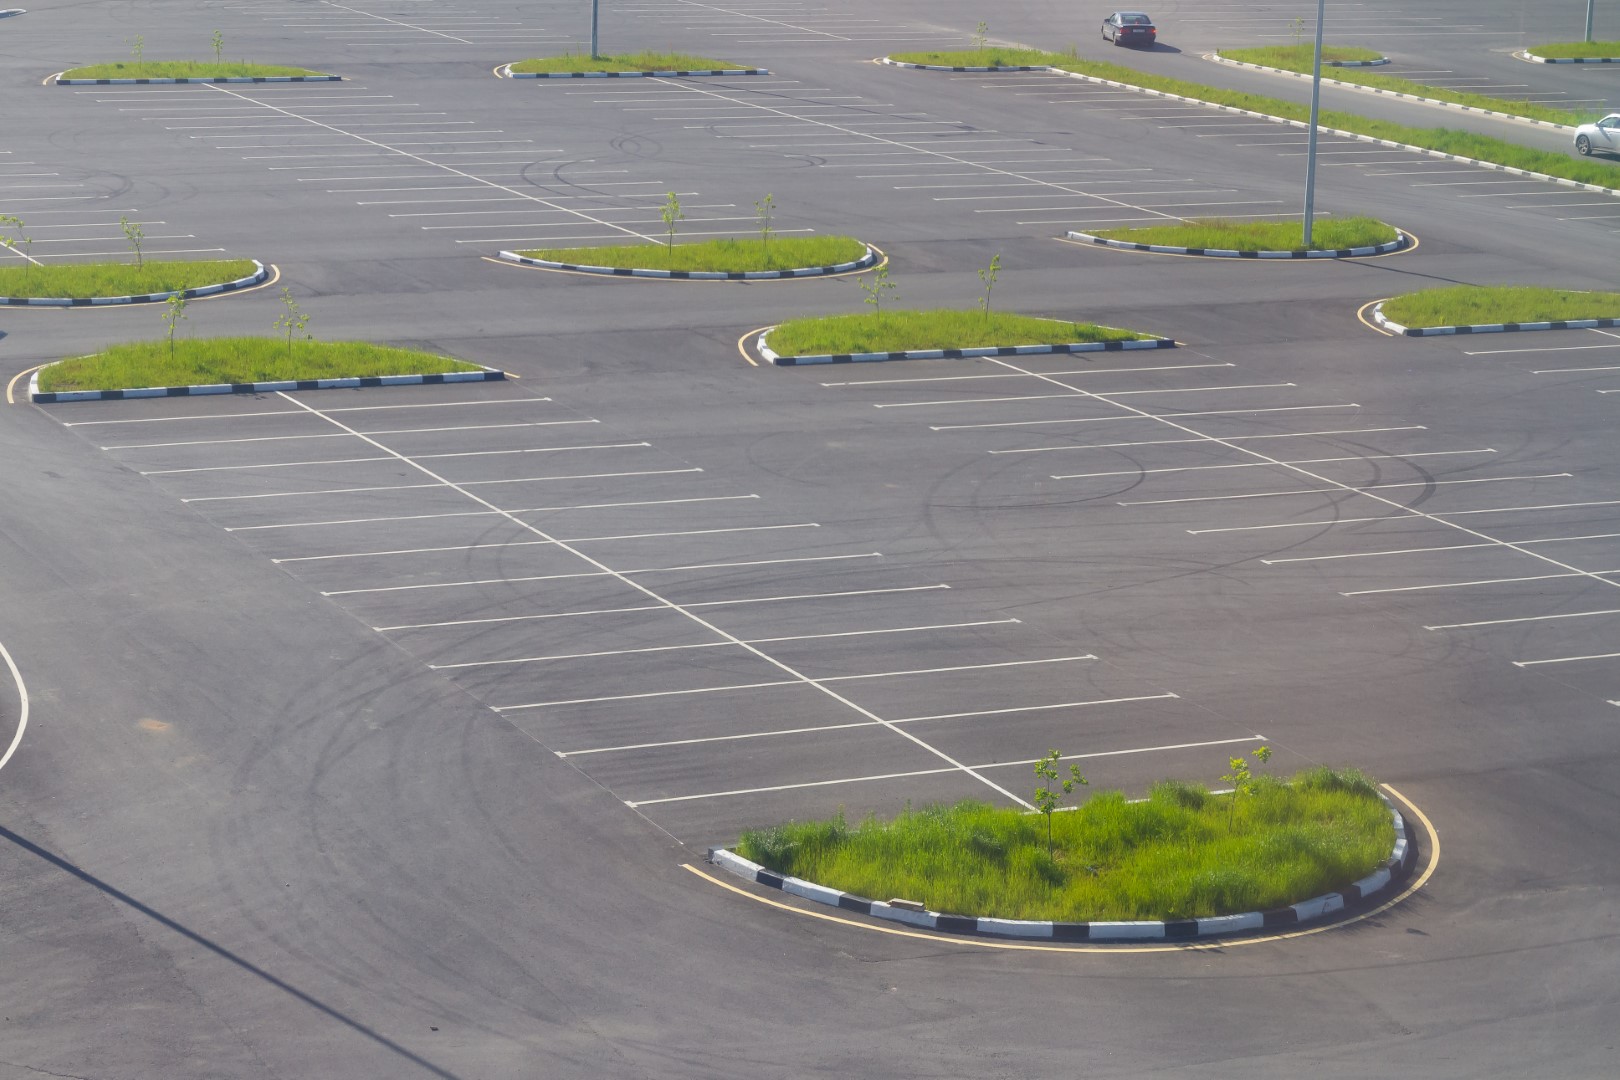 New car parking with markings, lawn and new asphalt, top view.